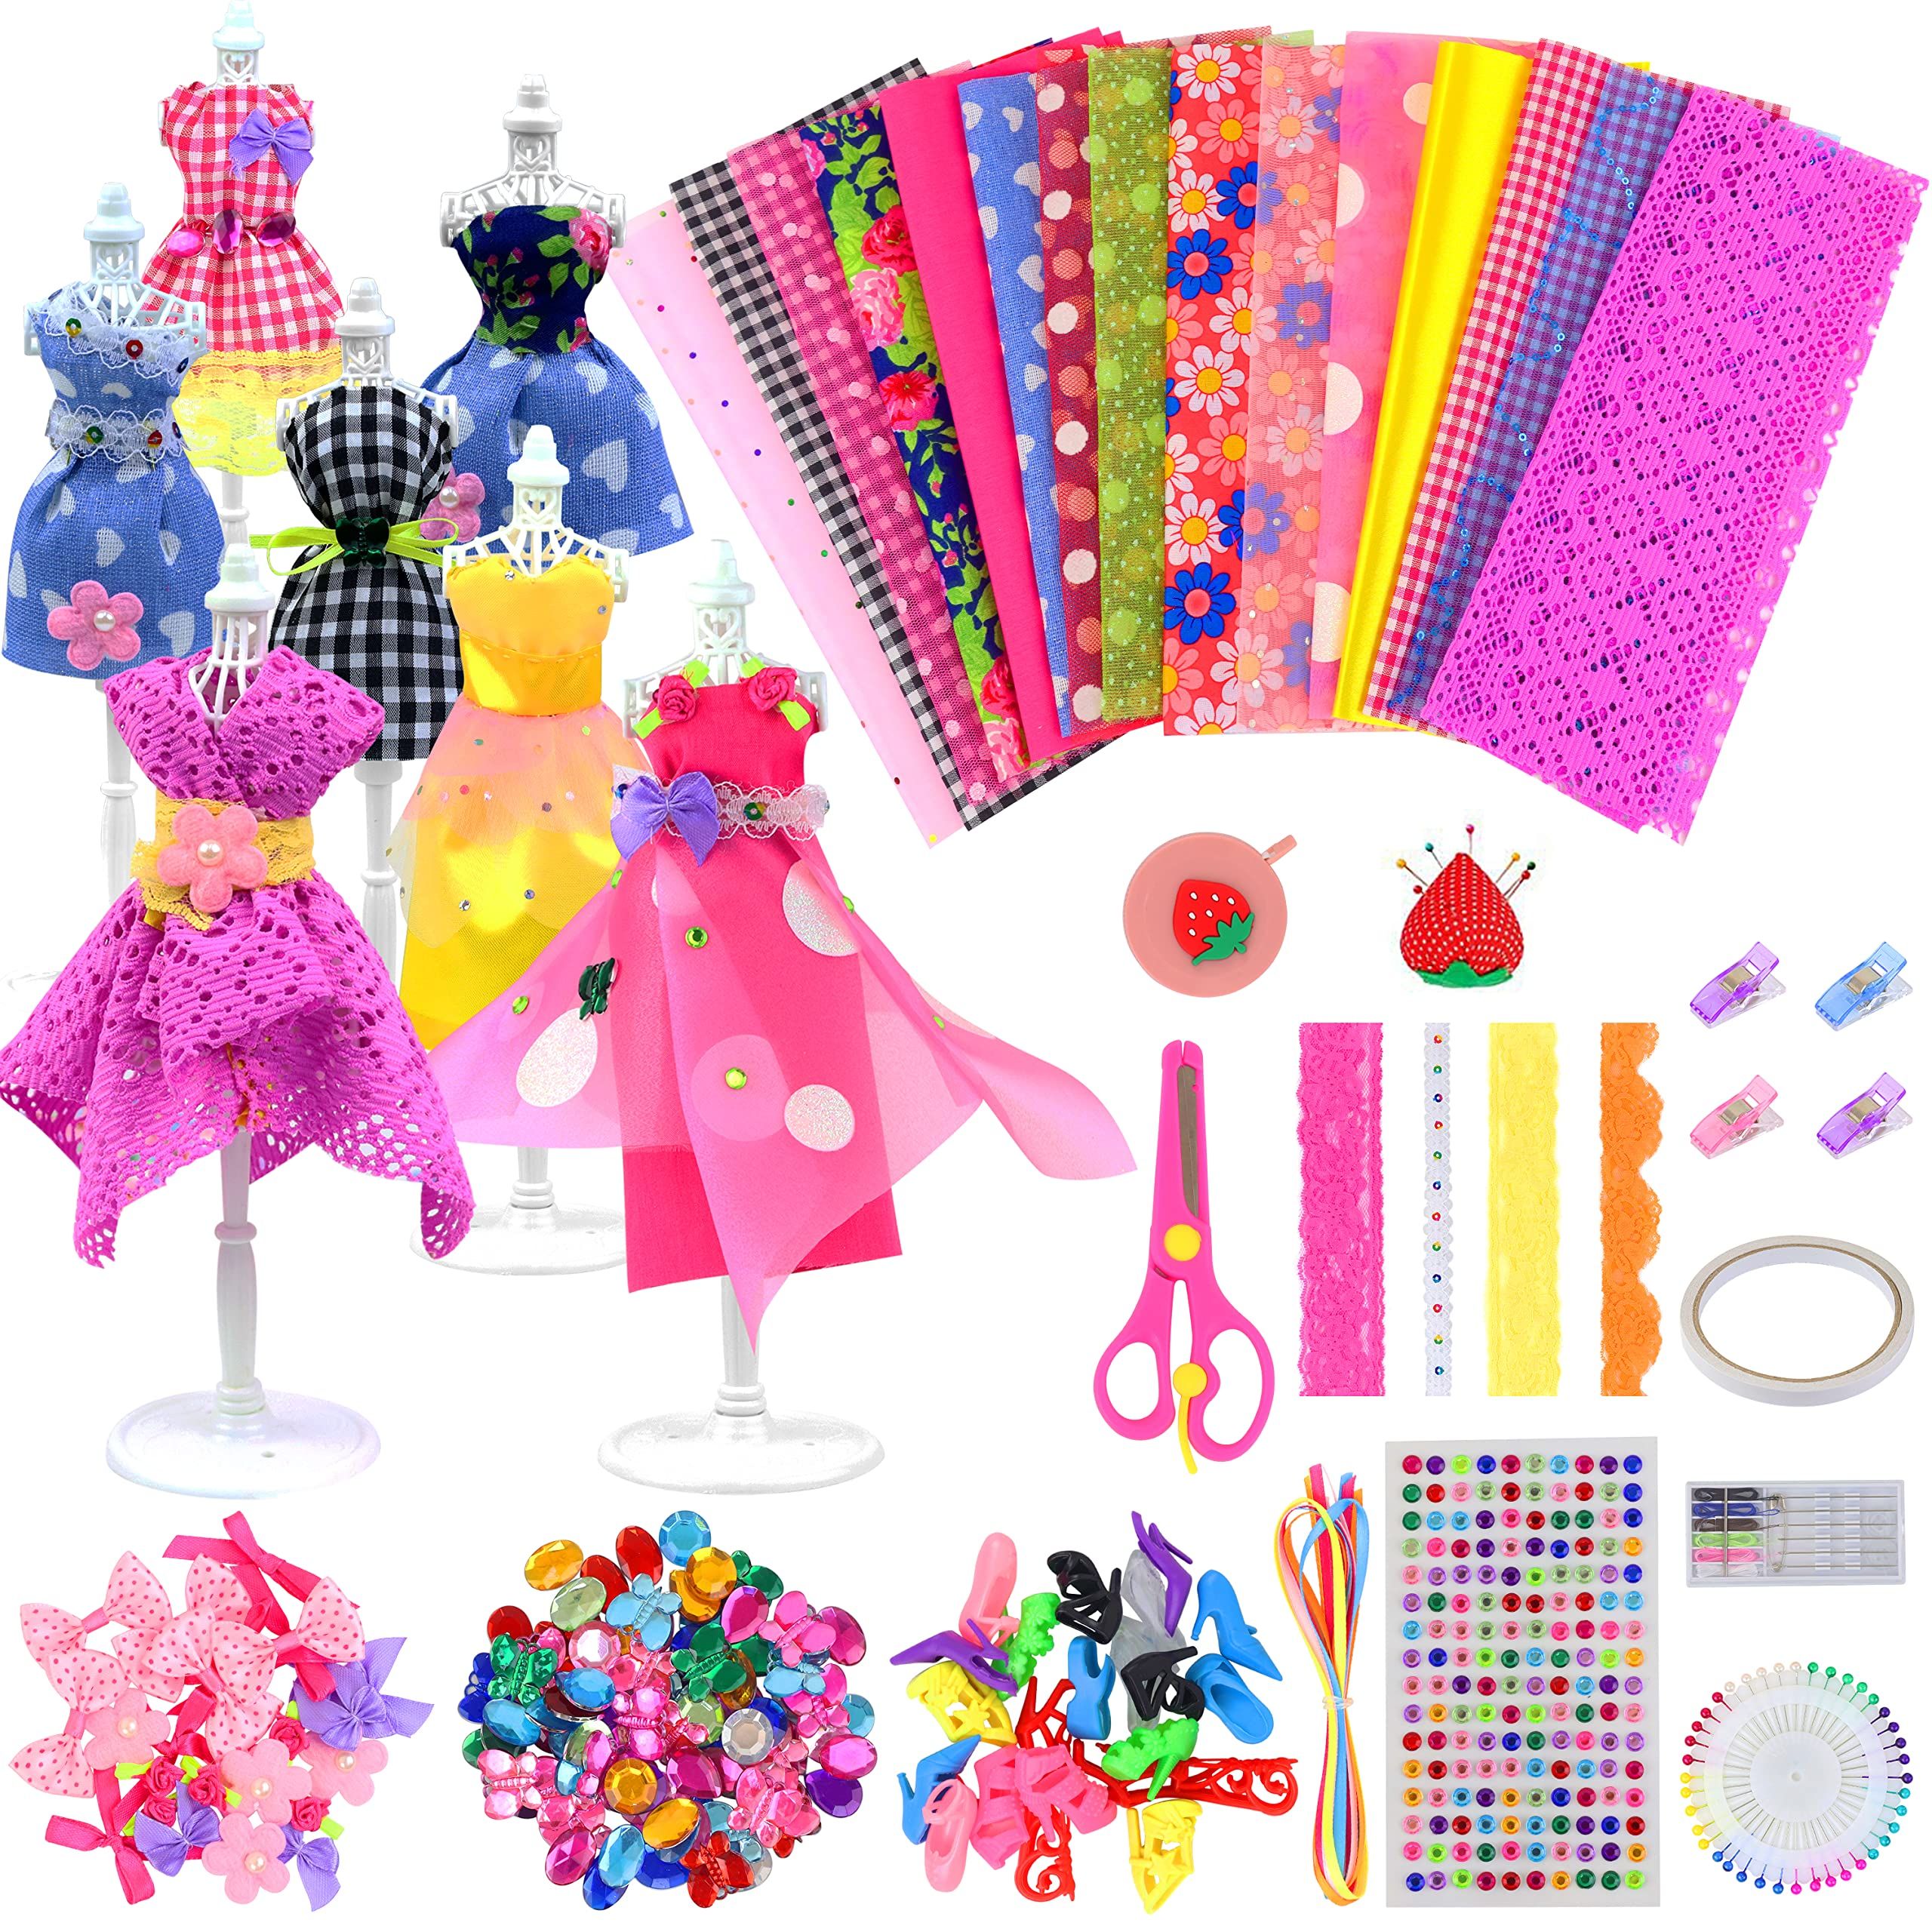 ZITA ELEMENT 335+ Pcs Fashion Design 11.5 Inch Girl Doll Clothes Accessories Kit - Creativity Doll Dress DIY Crafts and Sewing Kit 11.5" Doll Shoes for Kids Girls Christmas Birthday Gift Age 6 to 12+ | Amazon (US)